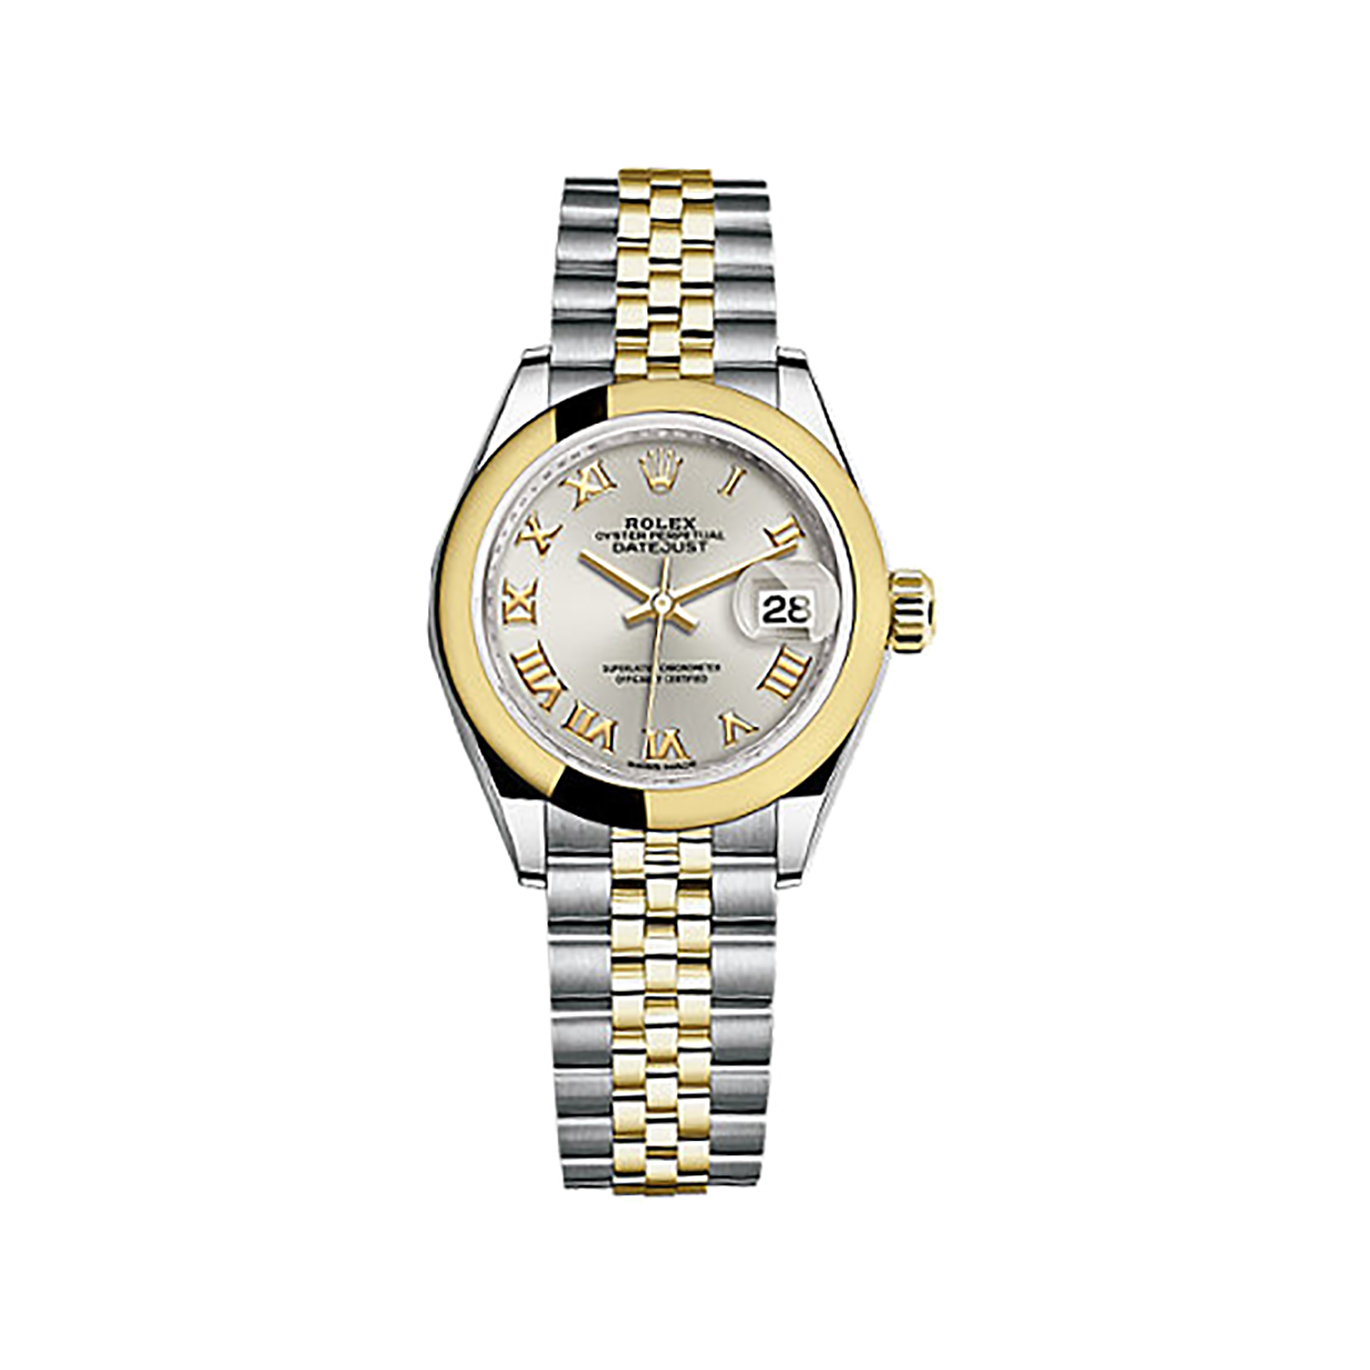 Lady-Datejust 28 279163 Gold & Stainless Steel Watch (Silver)?